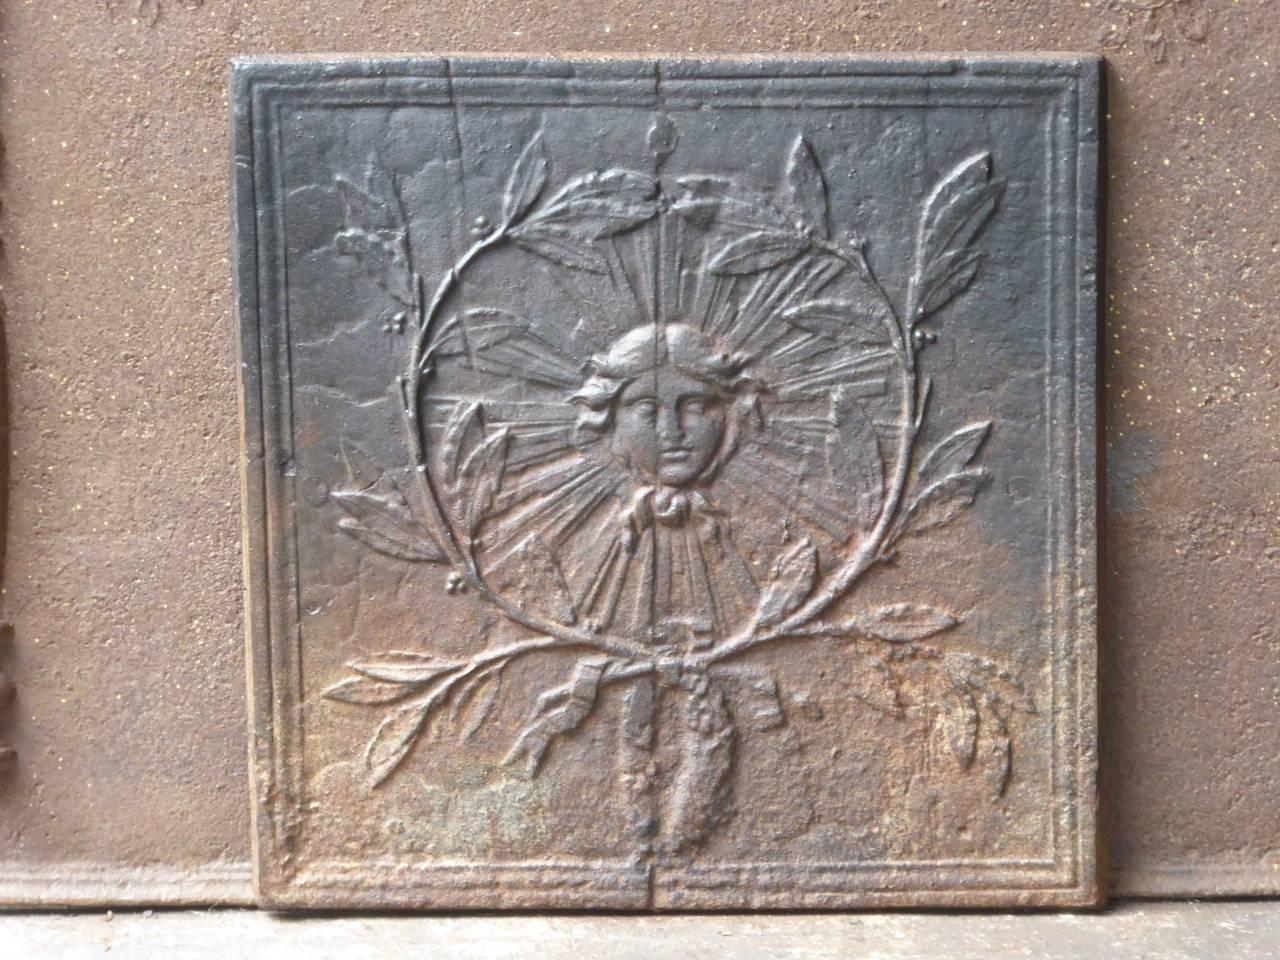 French Louis XIV style fireback with a sun surrounded by olive branches. The sun symbolizes king Louis XIV and the olive branches symbolize peace.